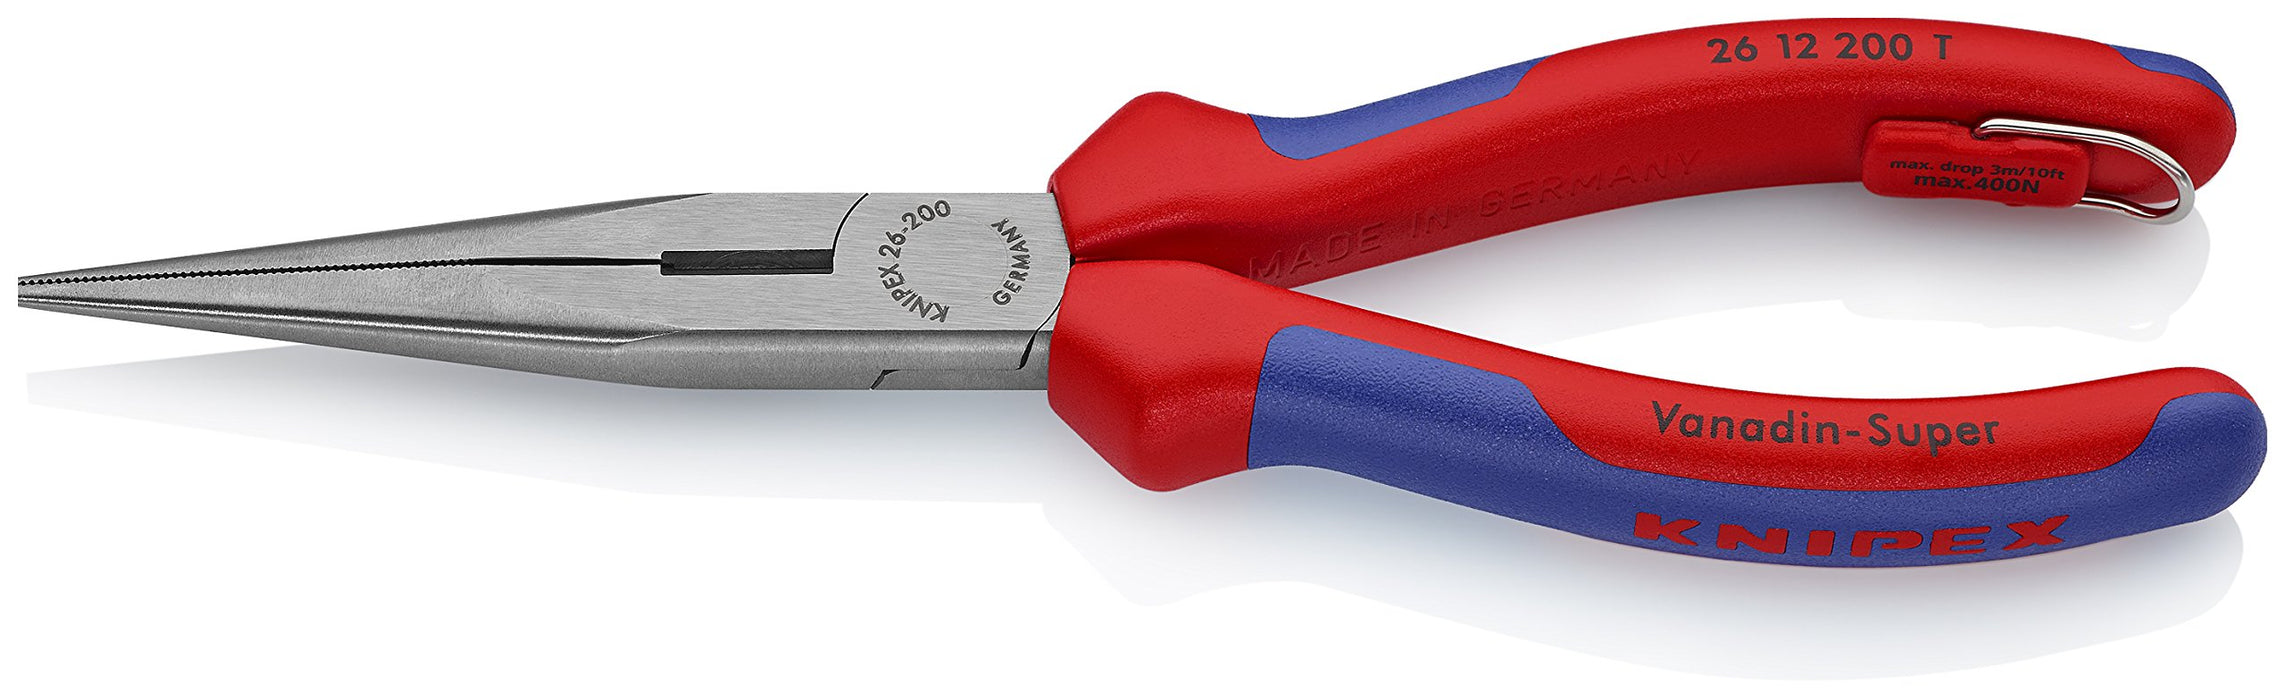 KNIPEX Long Nose Pliers w/ Cut-Tethered Att